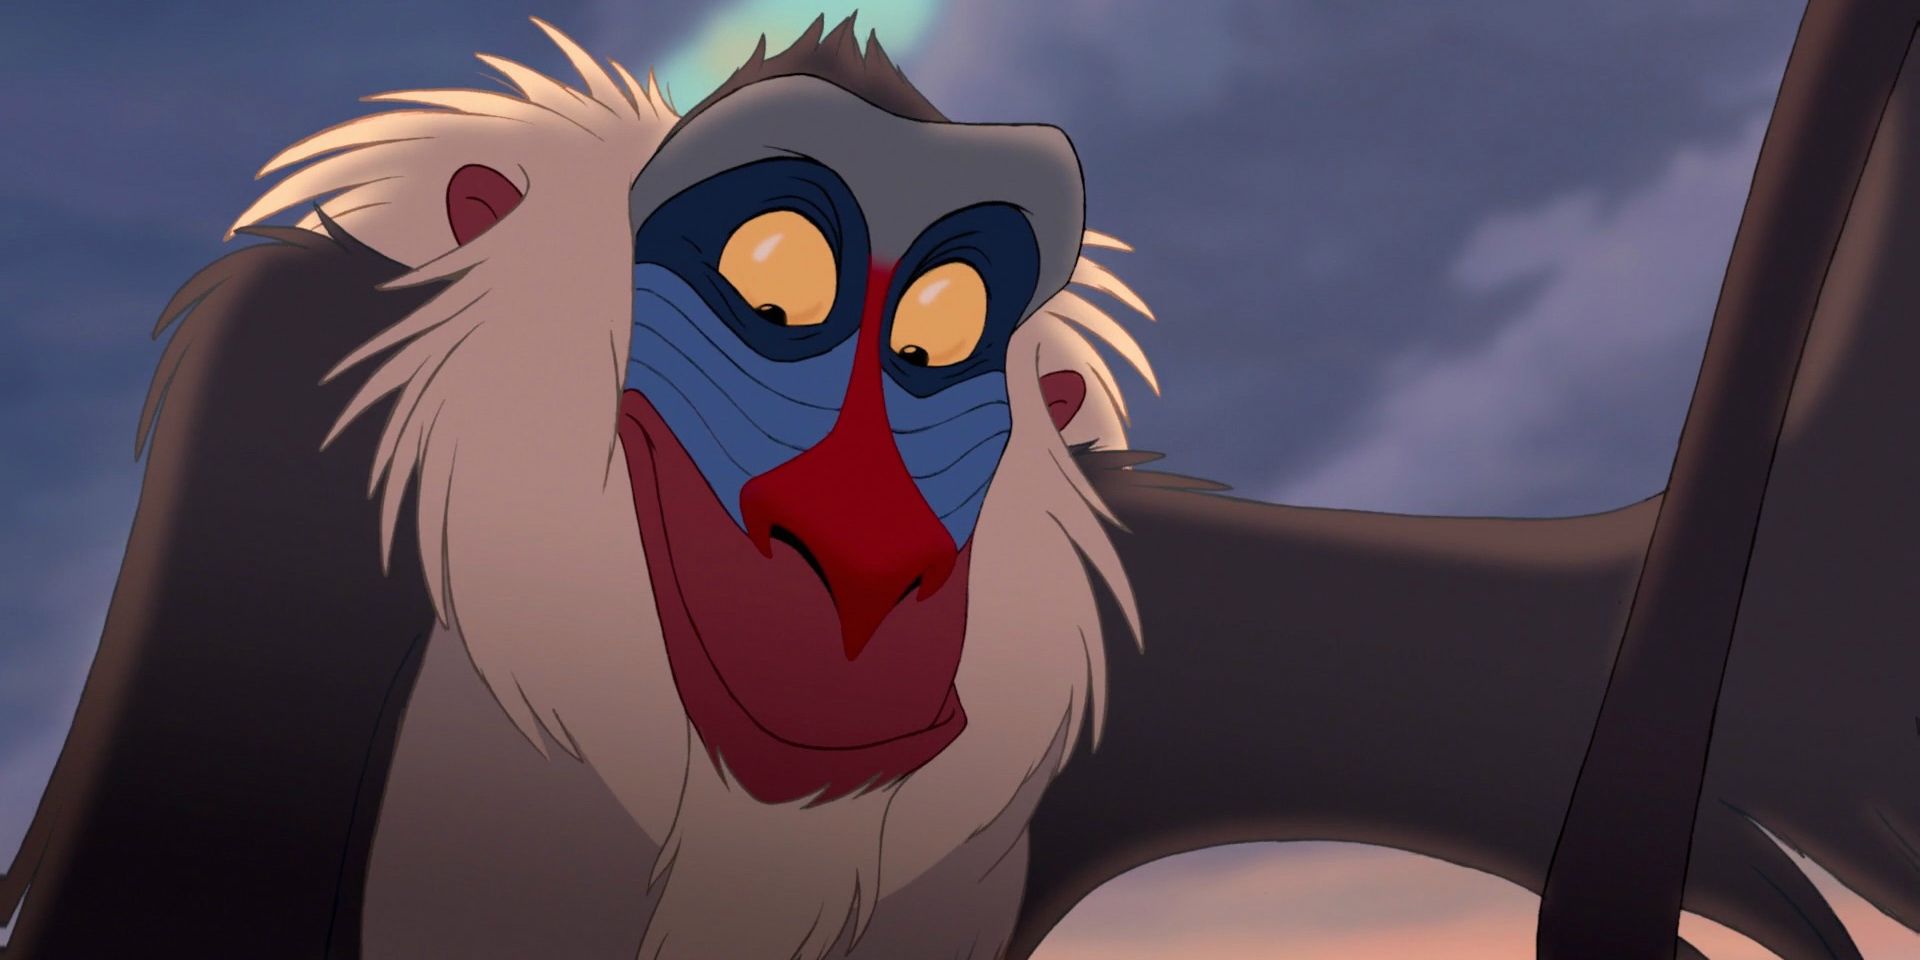 Rafiki smiling while looking down in The Lion King